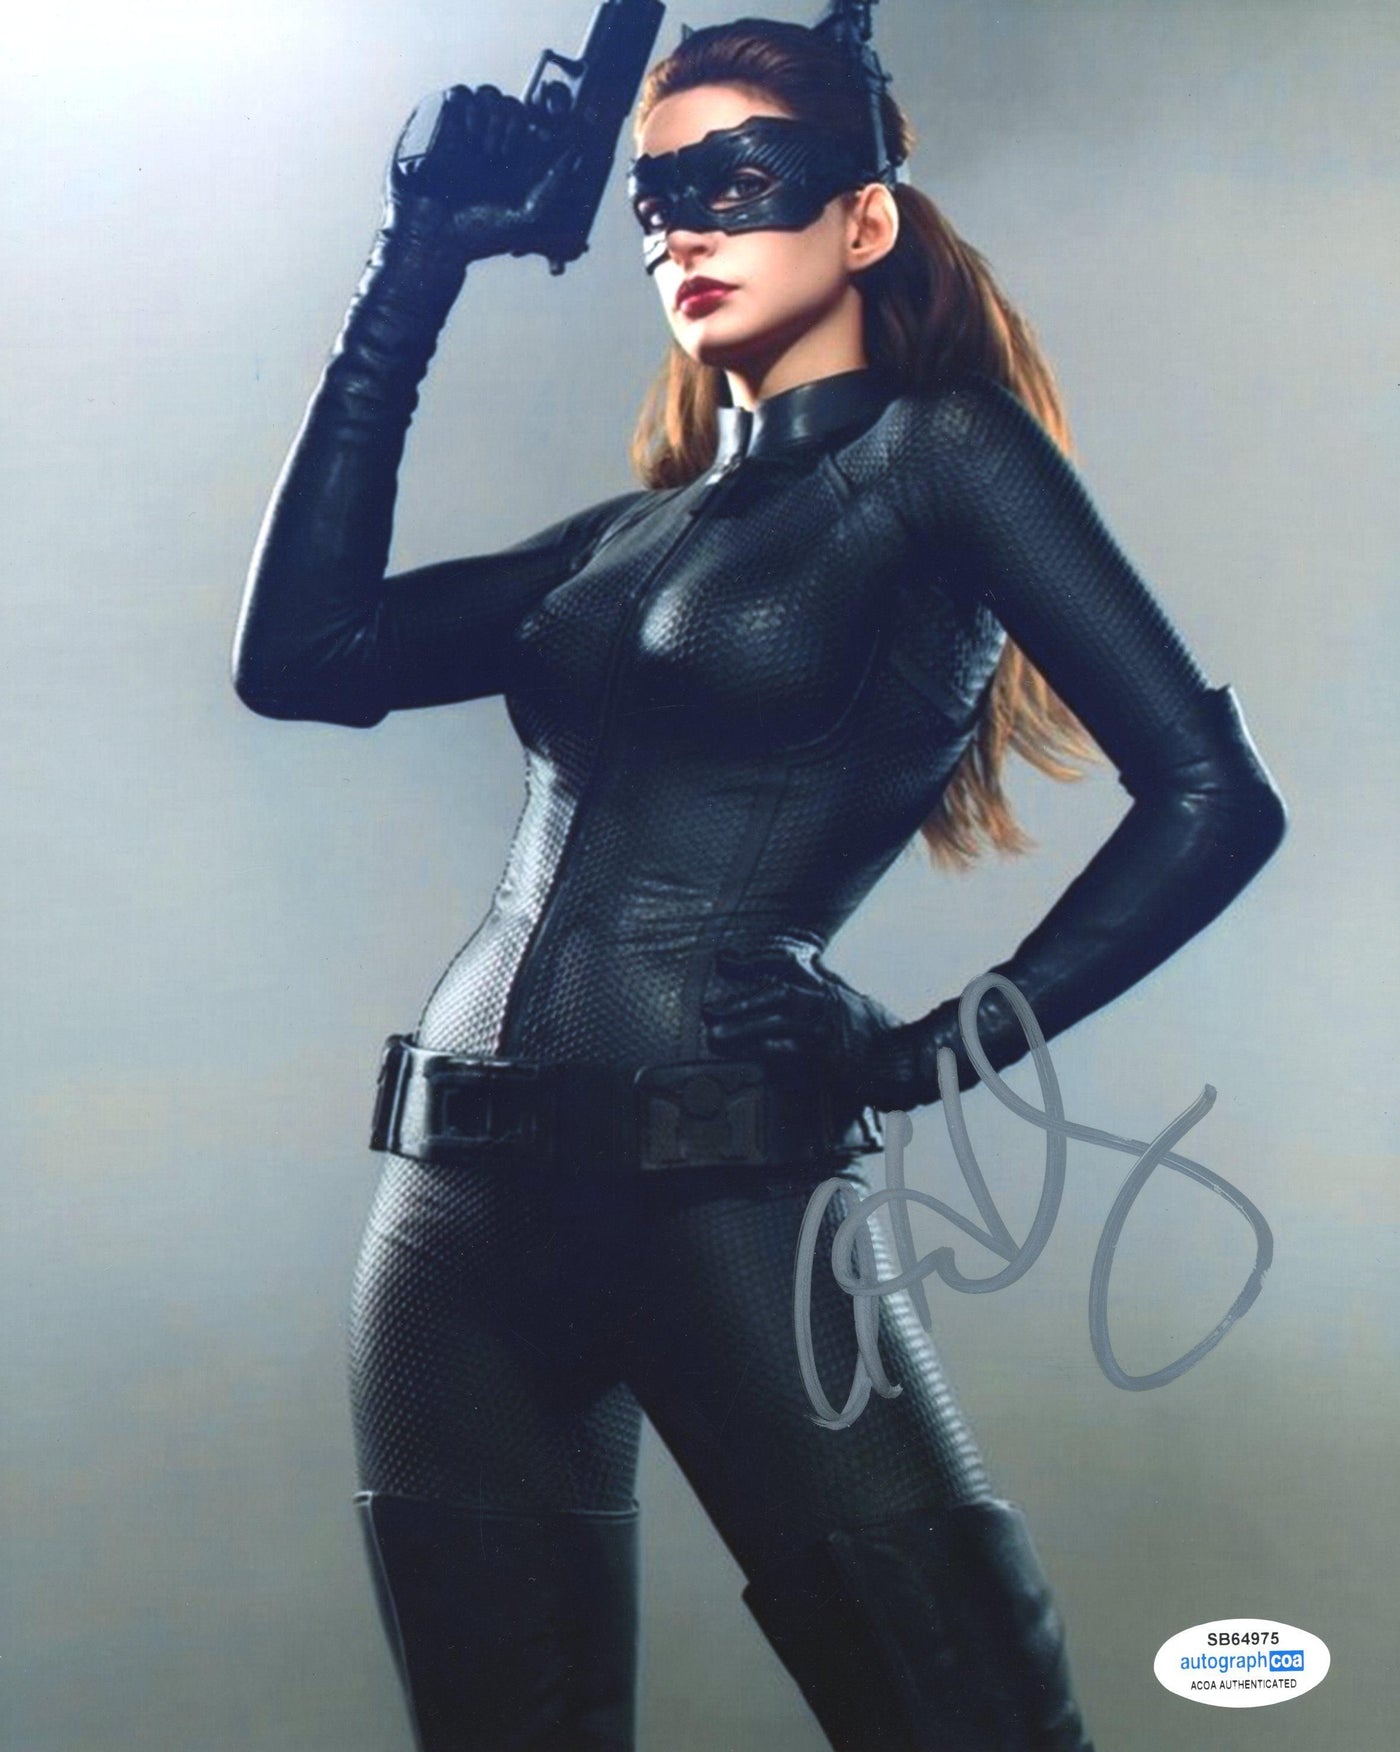 Anne Hathaway Signed 8x10 Photo The Dark Knight Rises Autographed ACOA #5